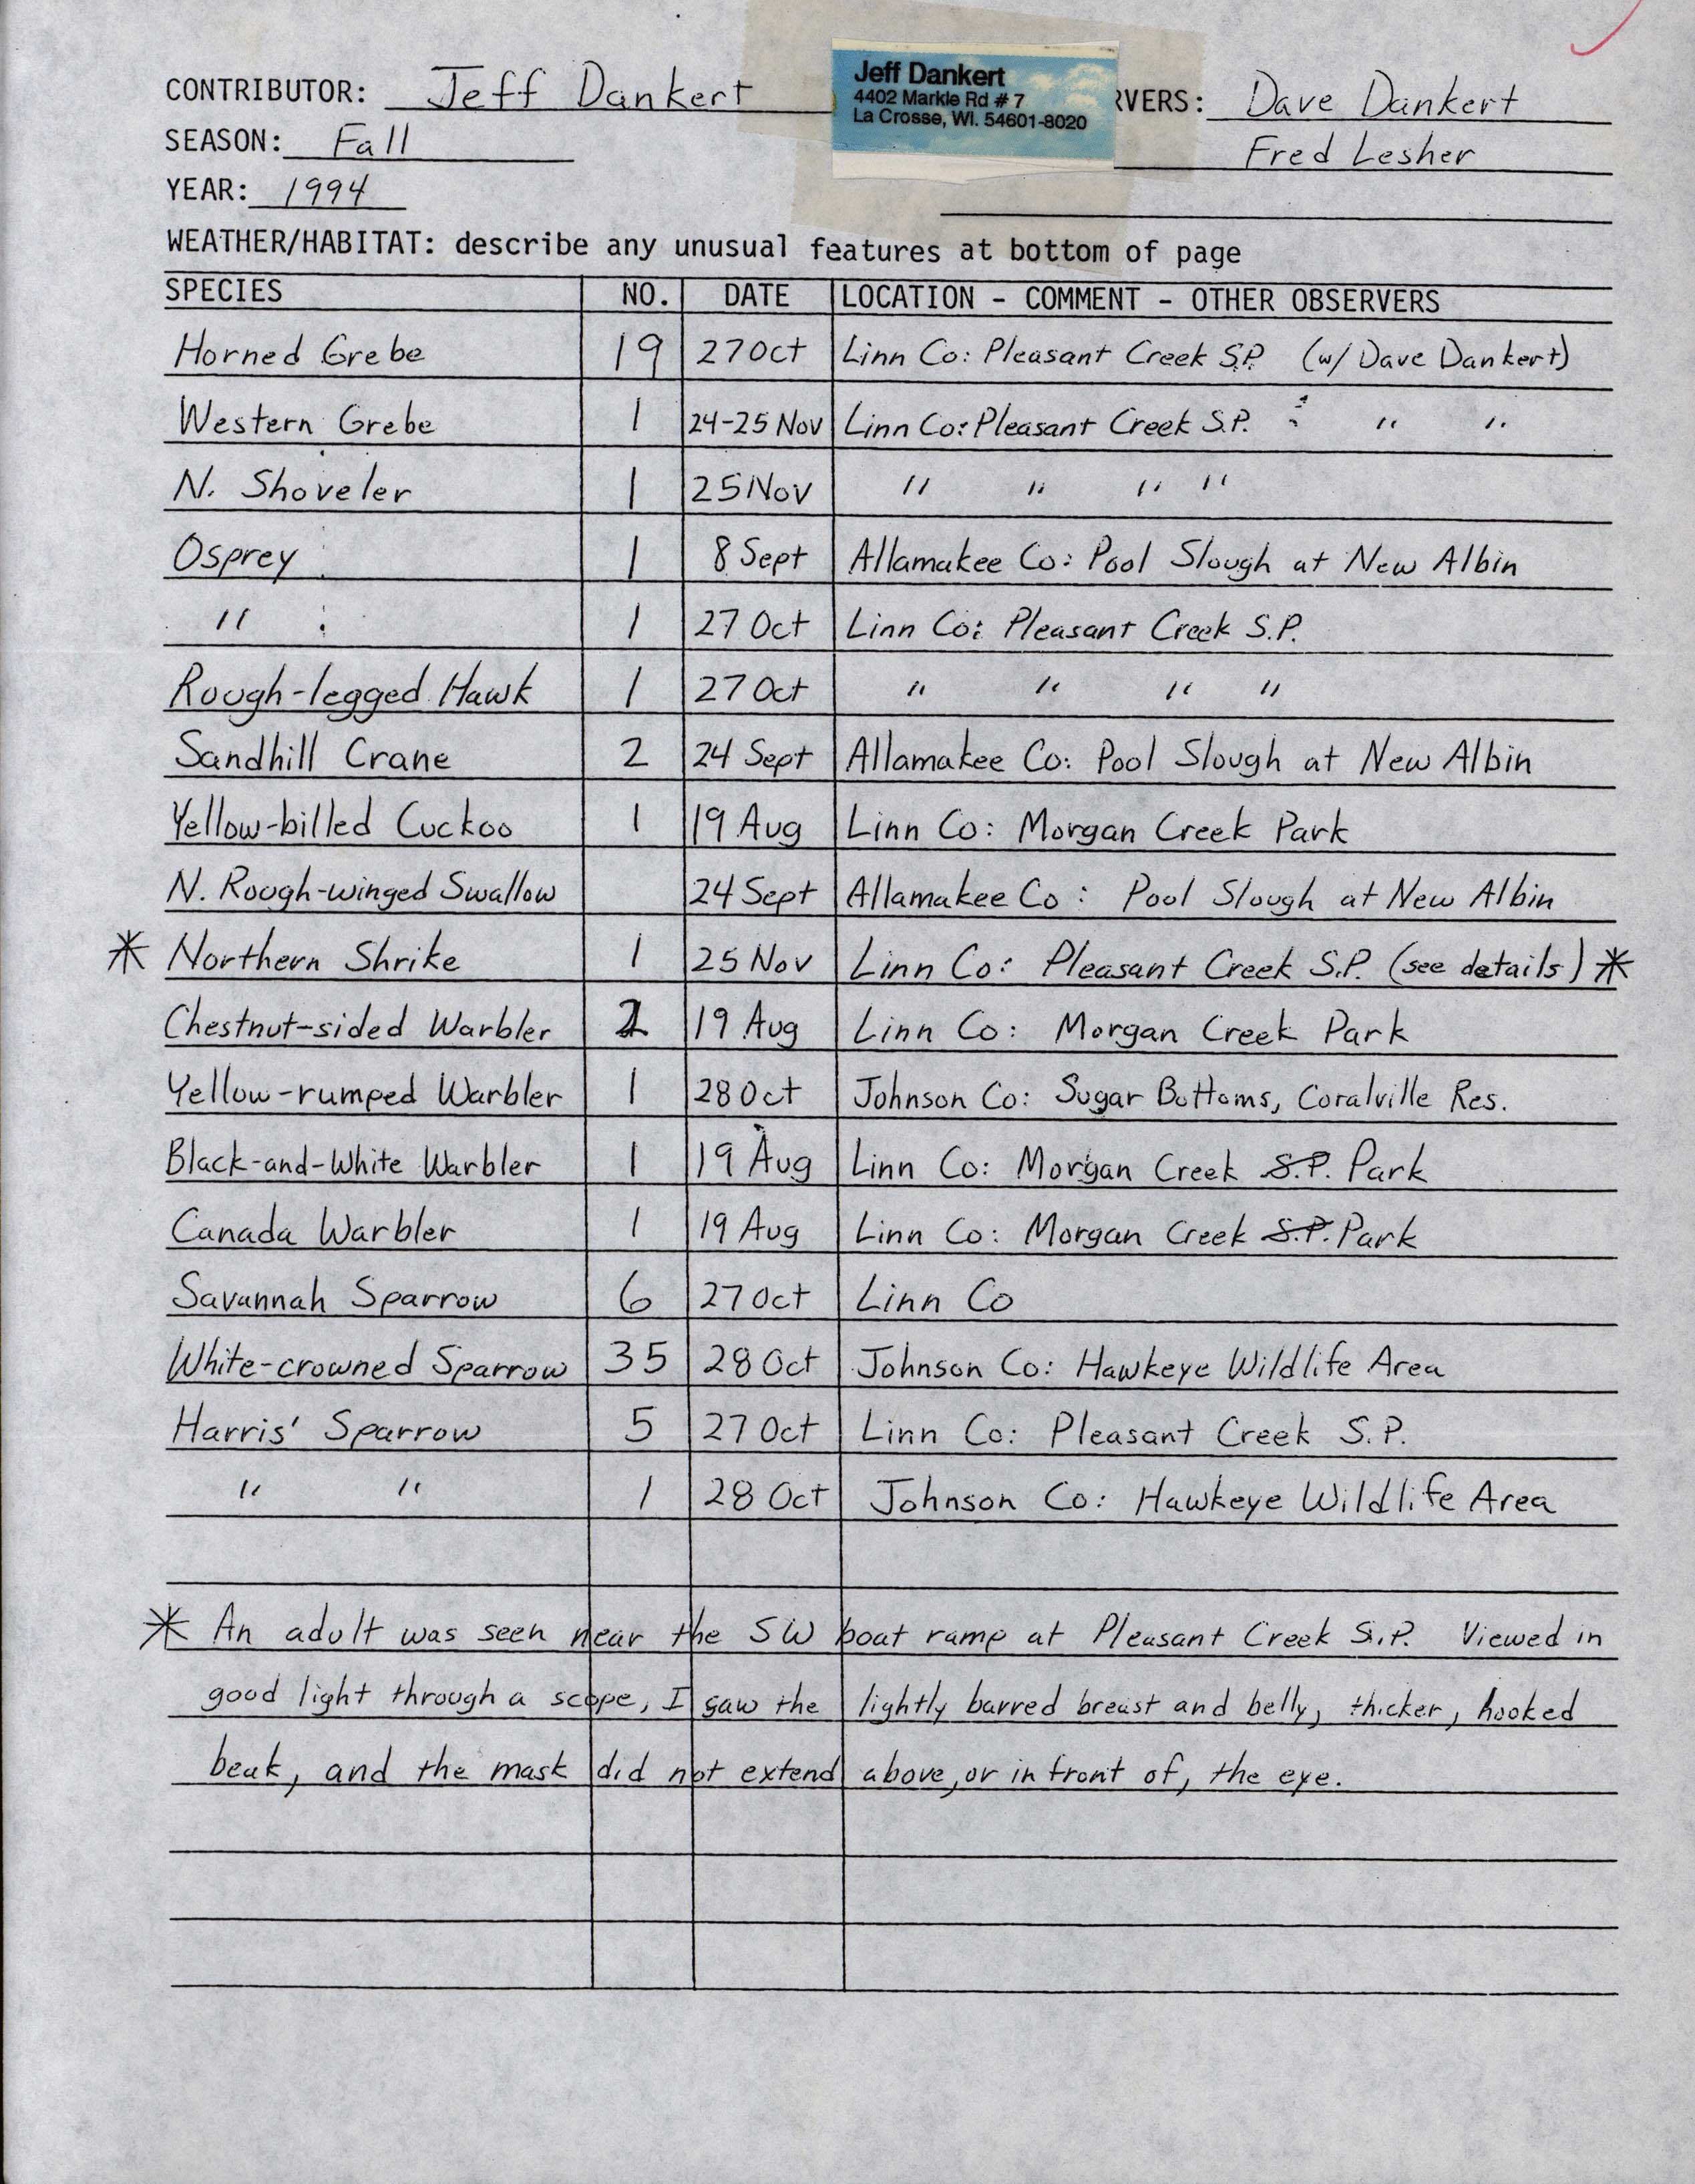 Field reports form for submitting seasonal observations of Iowa birds, Jeff Dankert, fall 1994